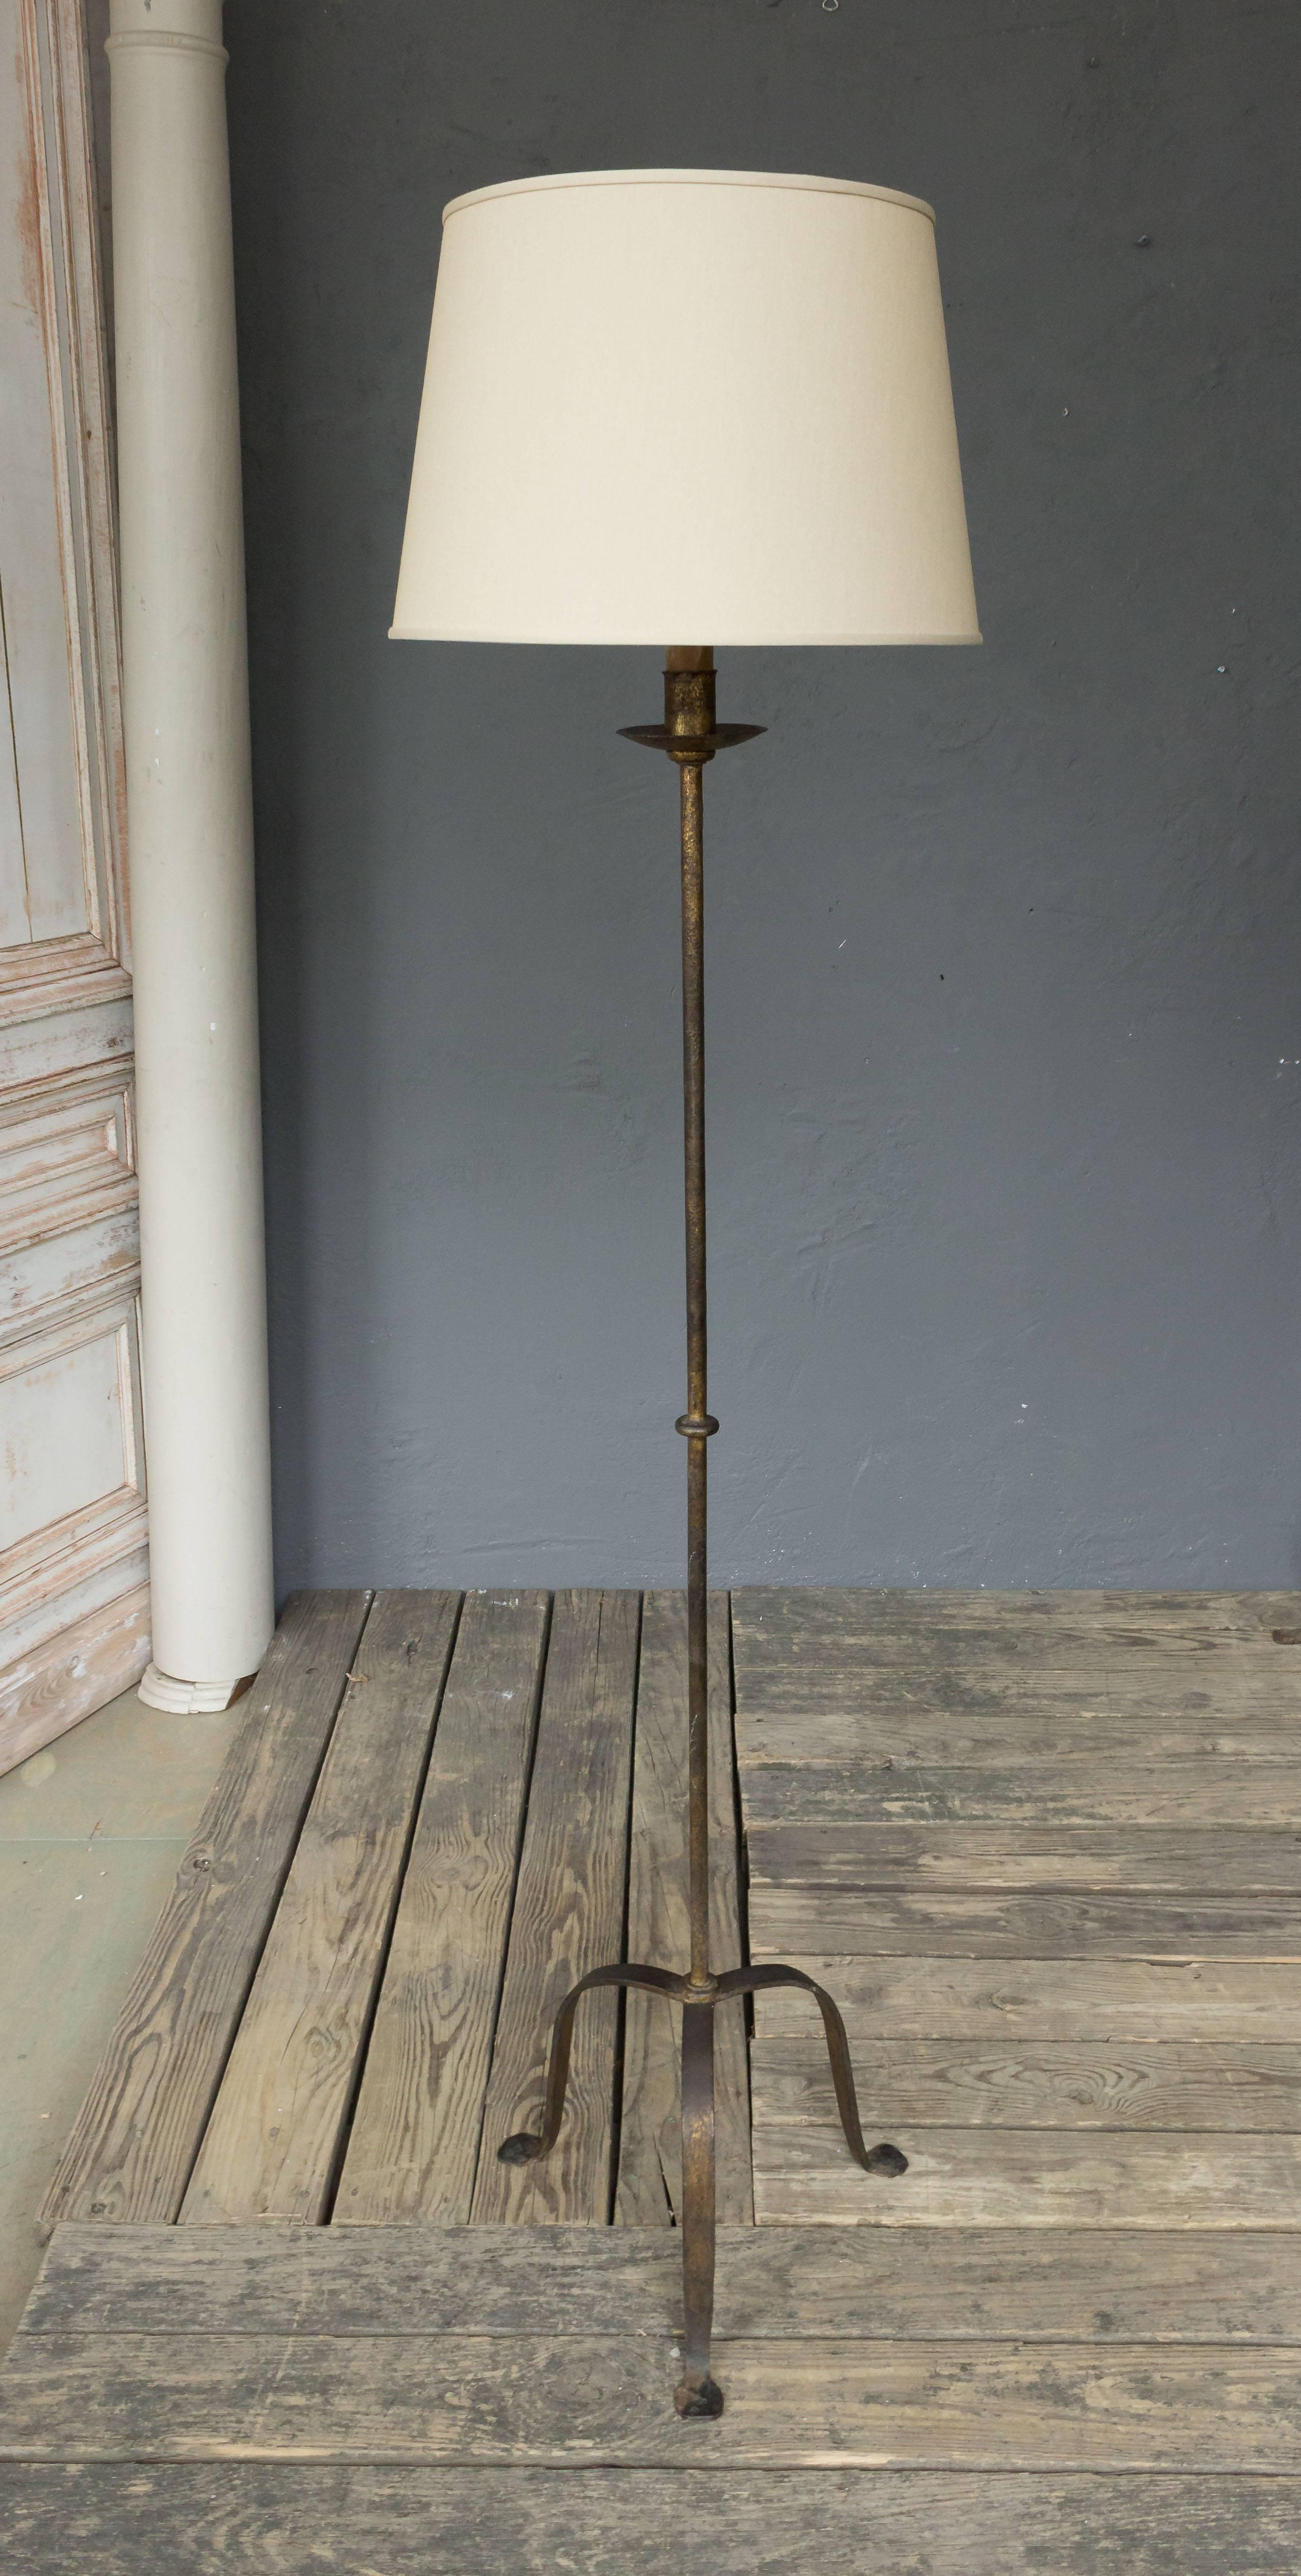 1940s Spanish Iron floor lamp with traces of gilt and patinated finish. Not sold with shade.